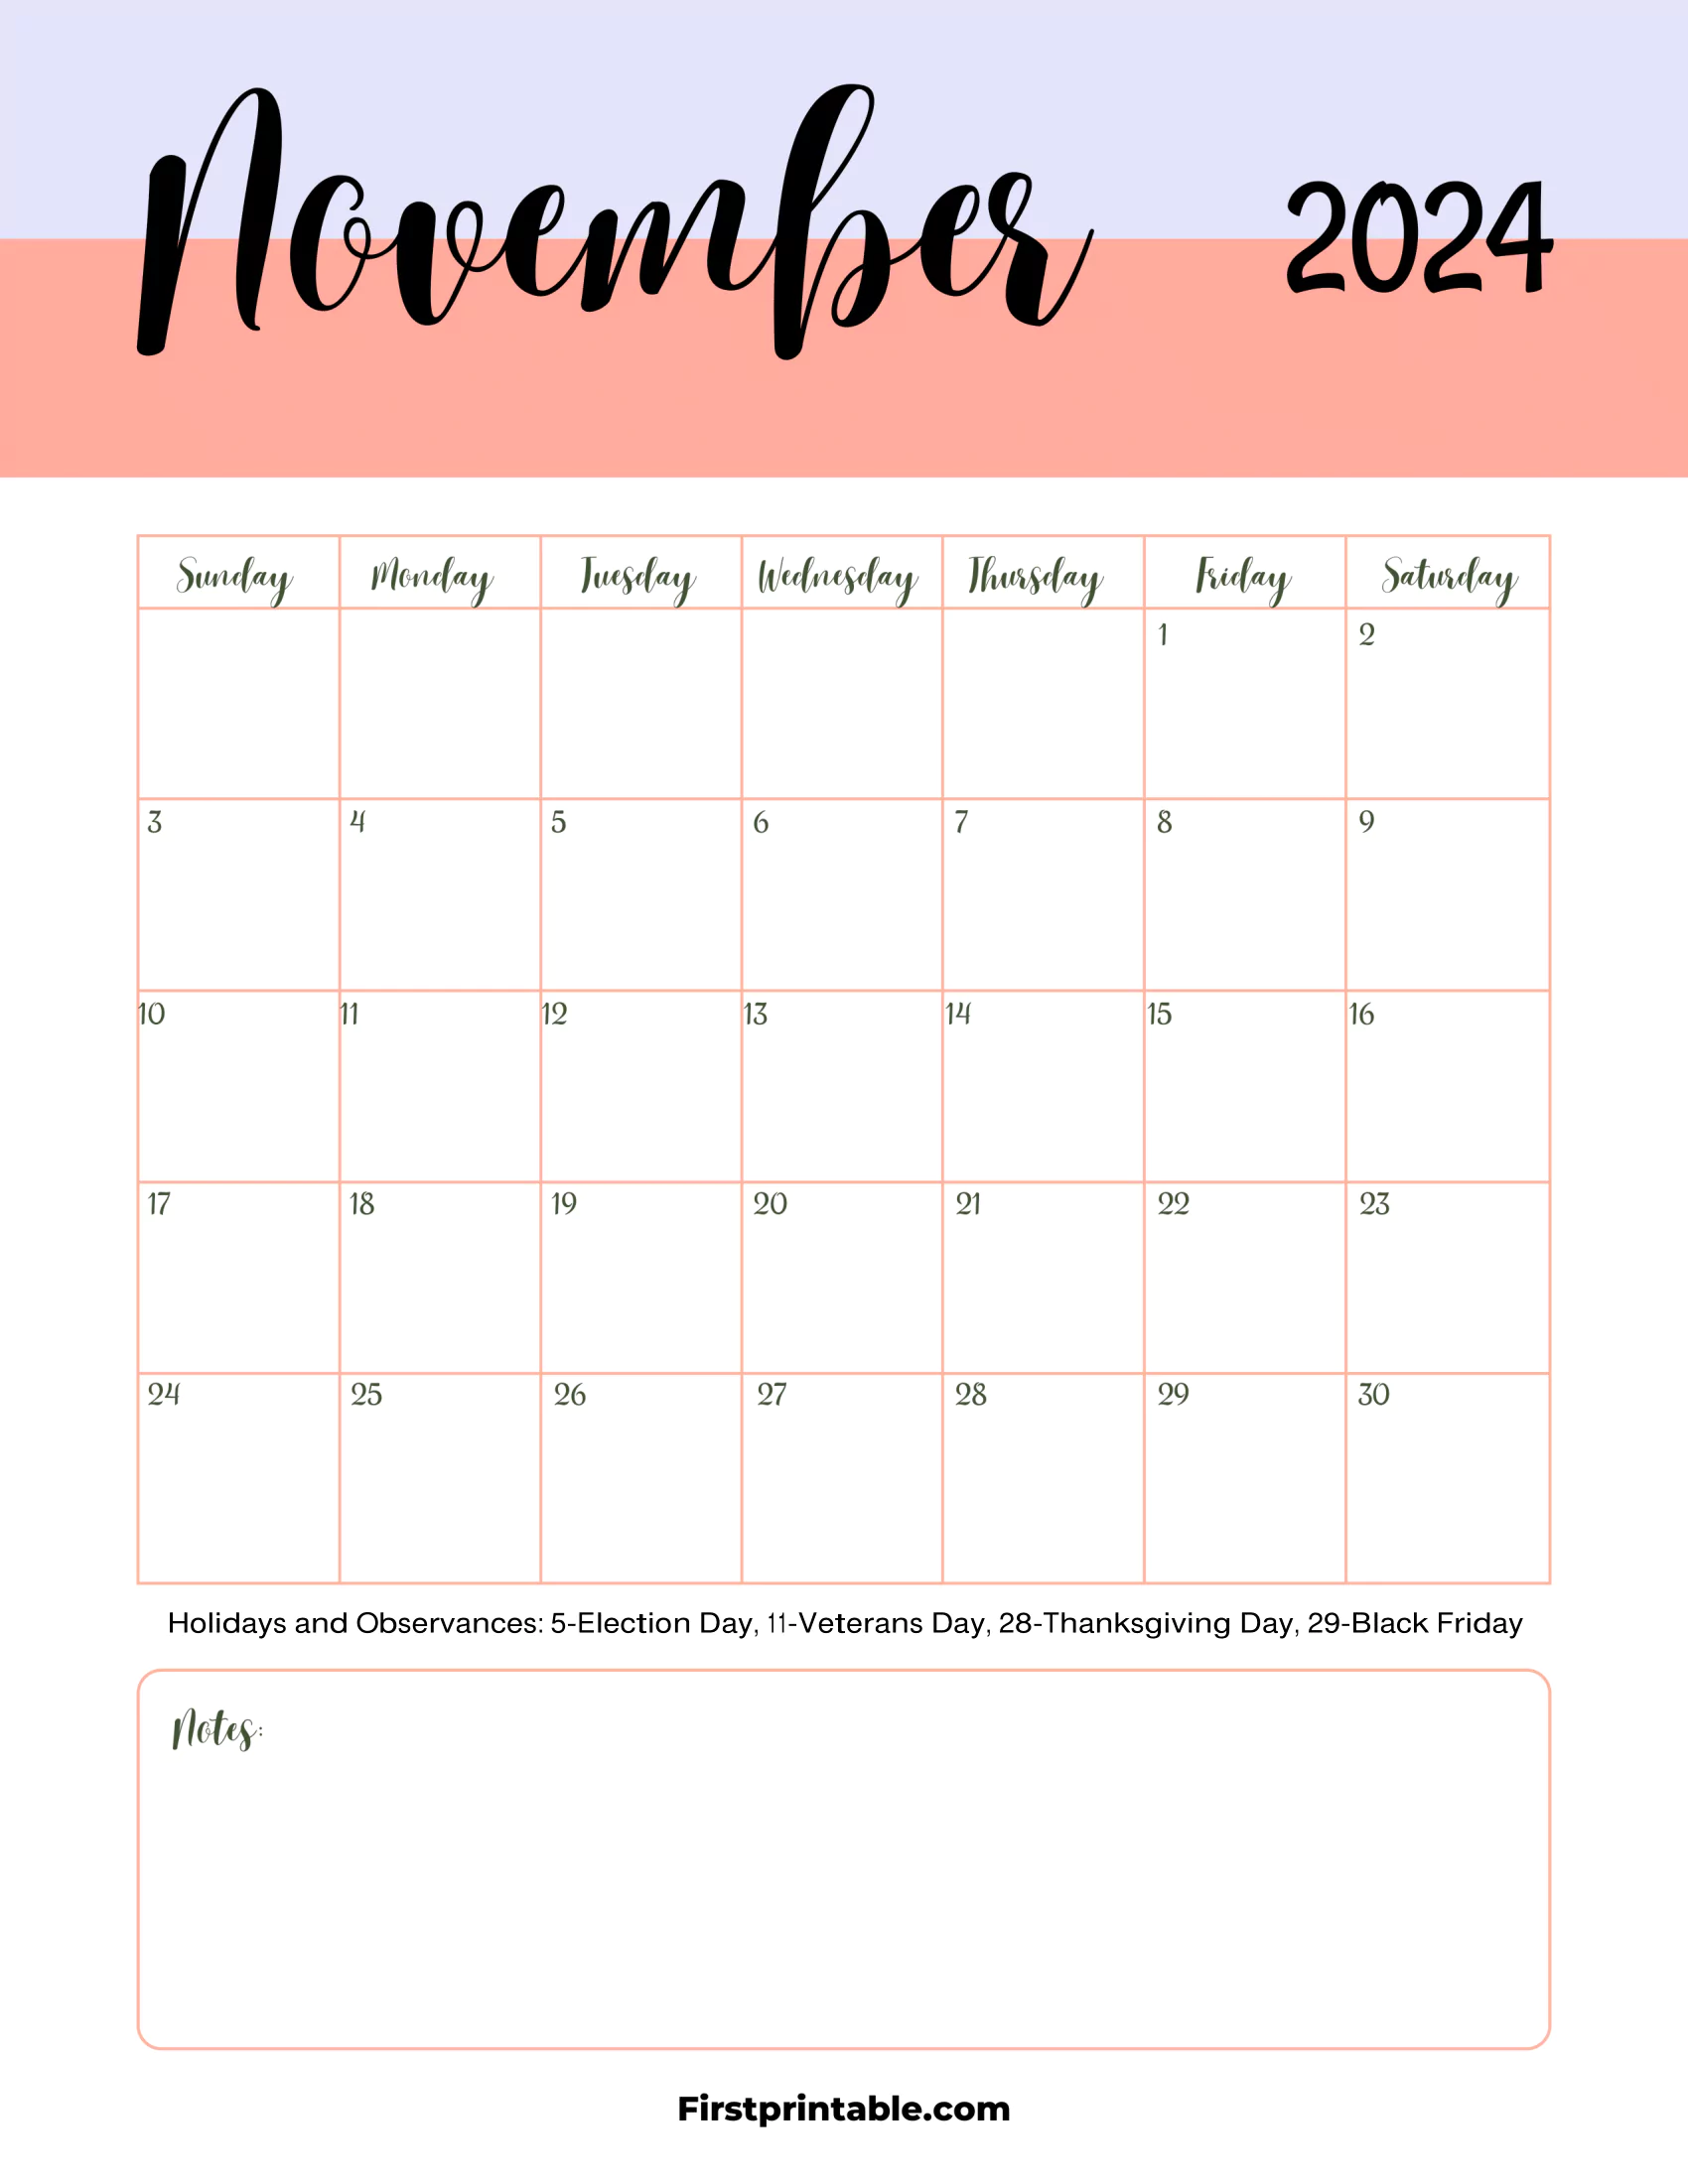 November Calendar 2024 Printable & Fillable with notes (With Holidays)